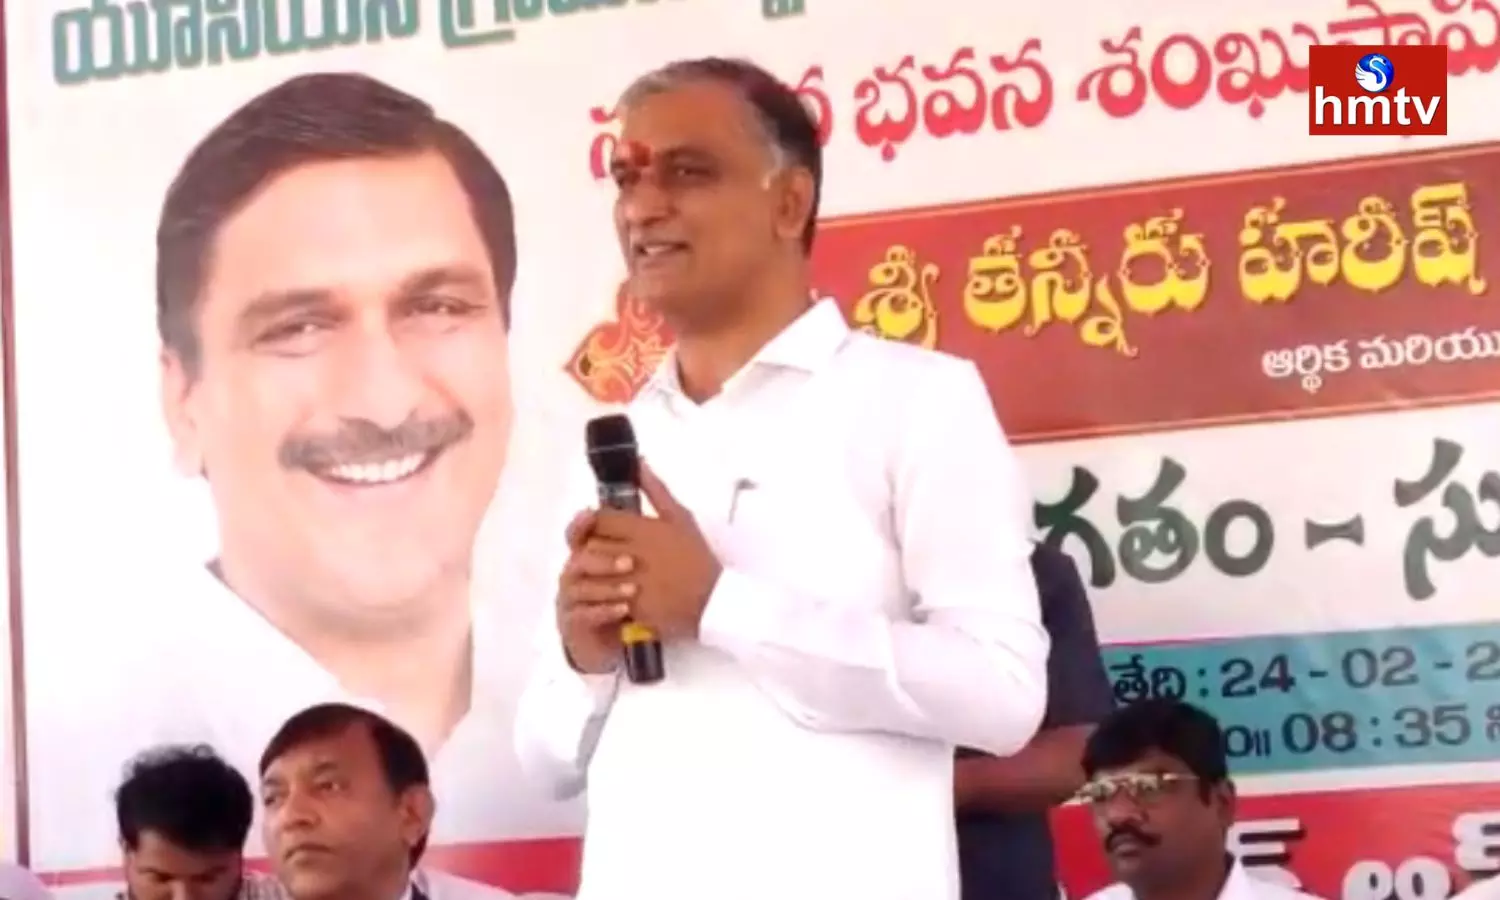 Harish Rao Talked About Women Training And Employment